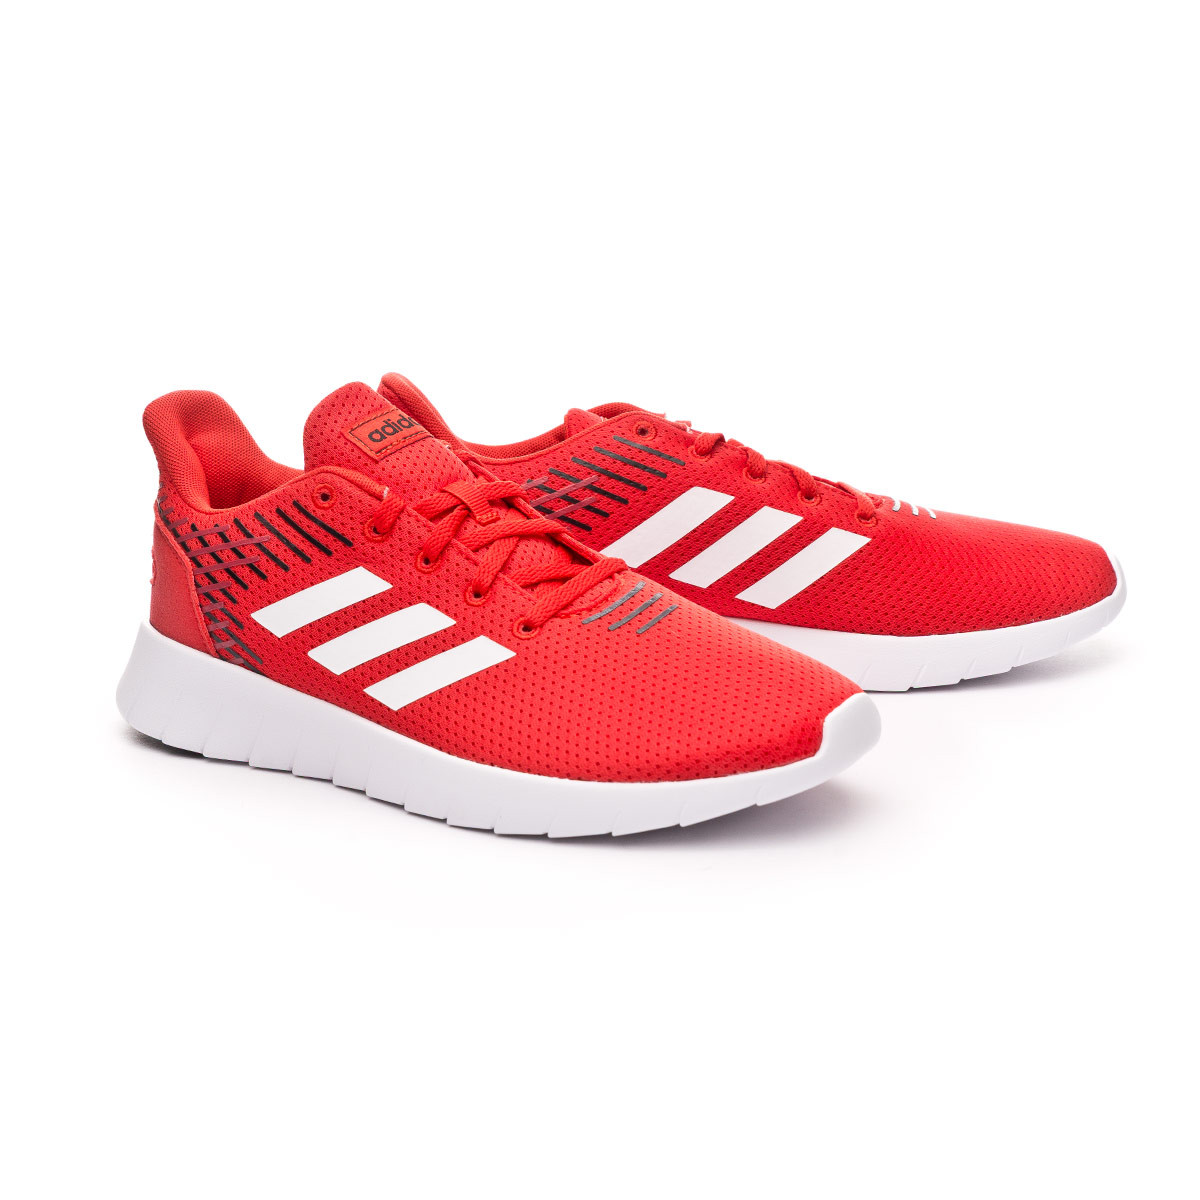 Trainers adidas Asweerun Active red 